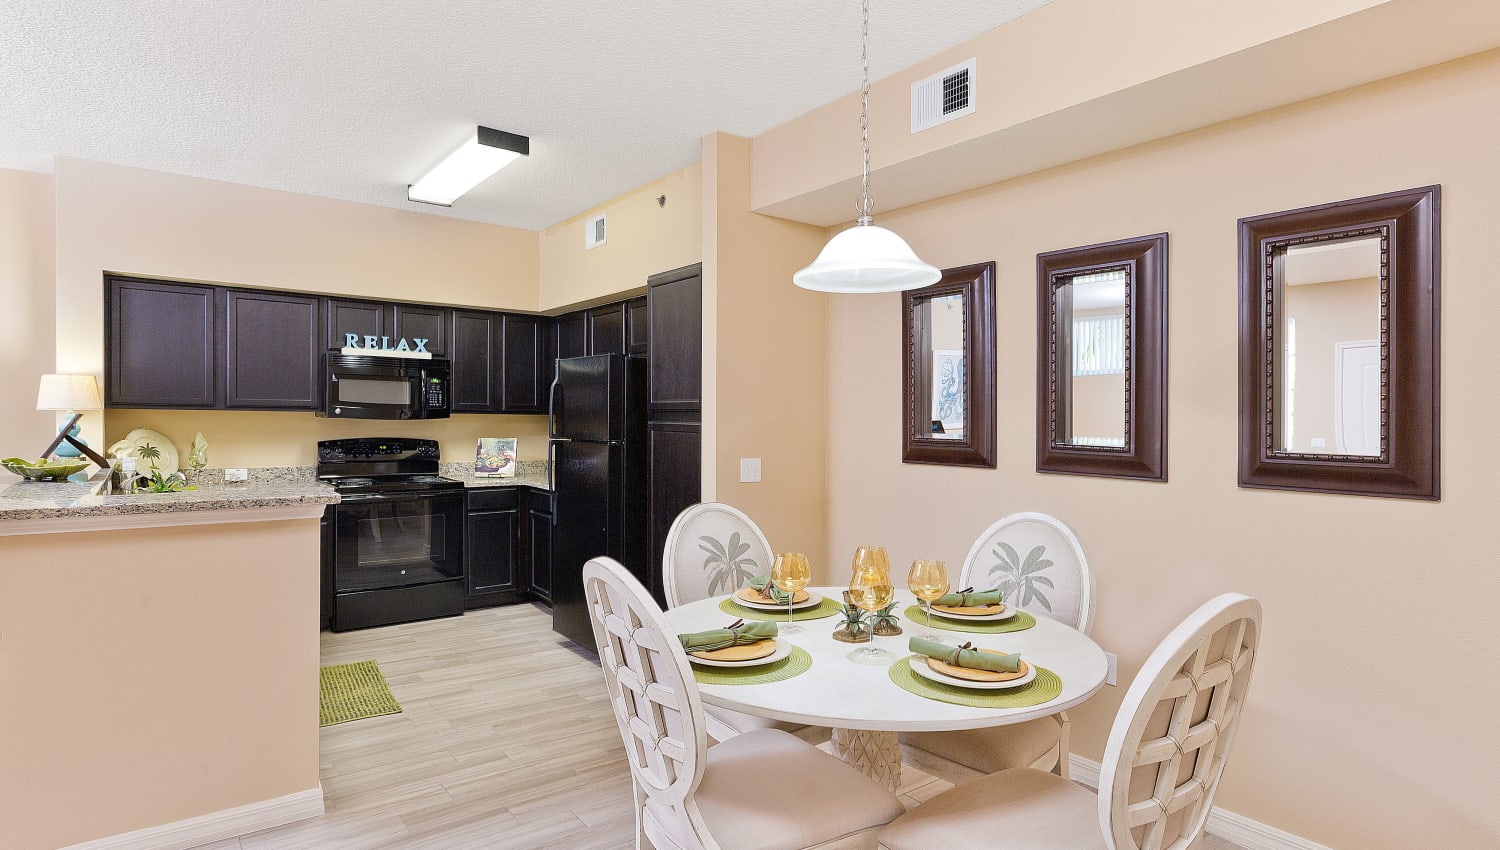 Model dining area and kitchen at Manatee Bay Apartments in Boynton Beach, Florida